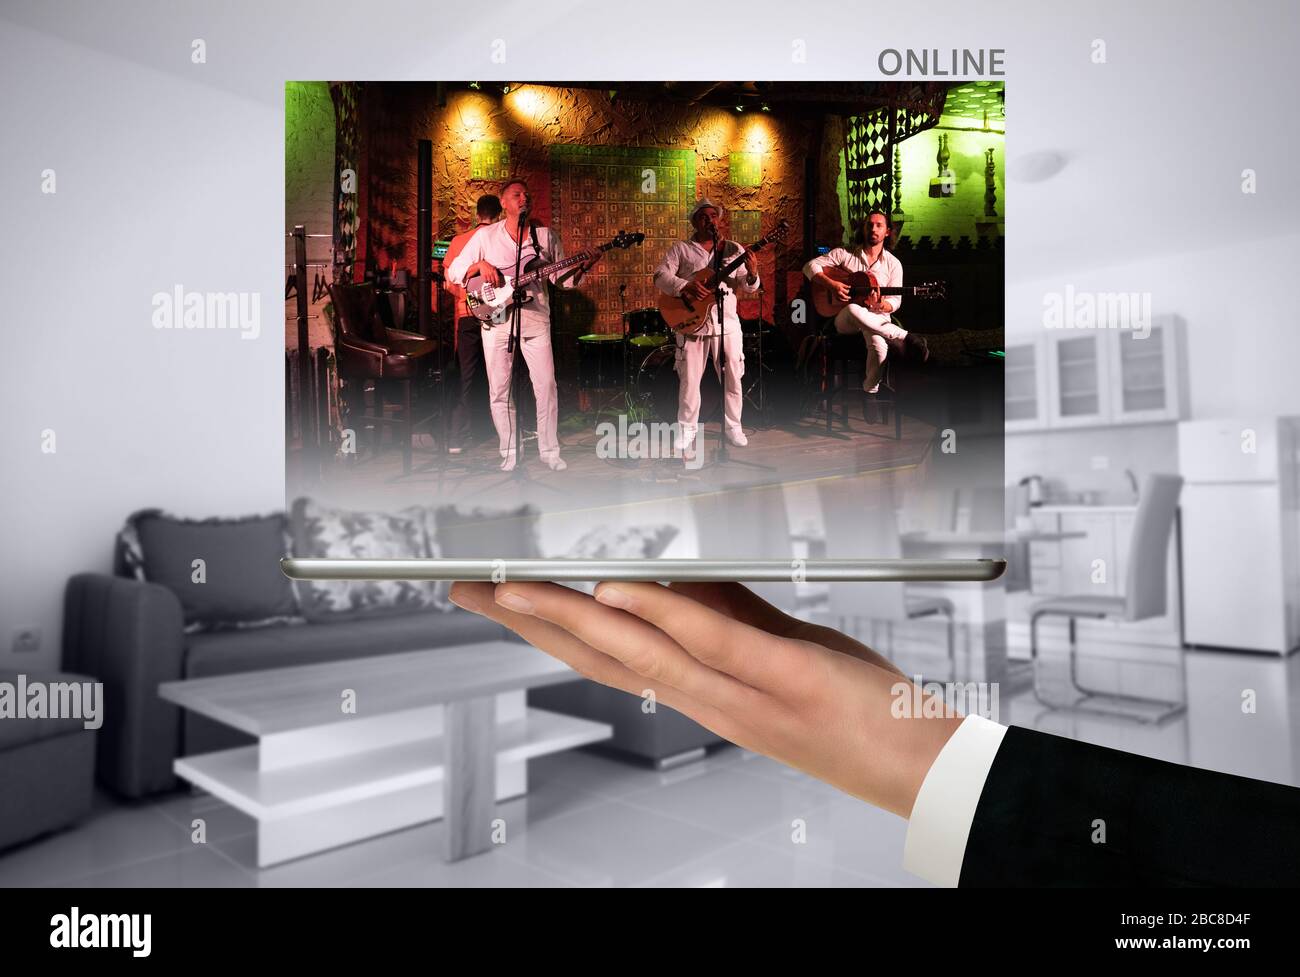 Online concert of music band. Stock Photo